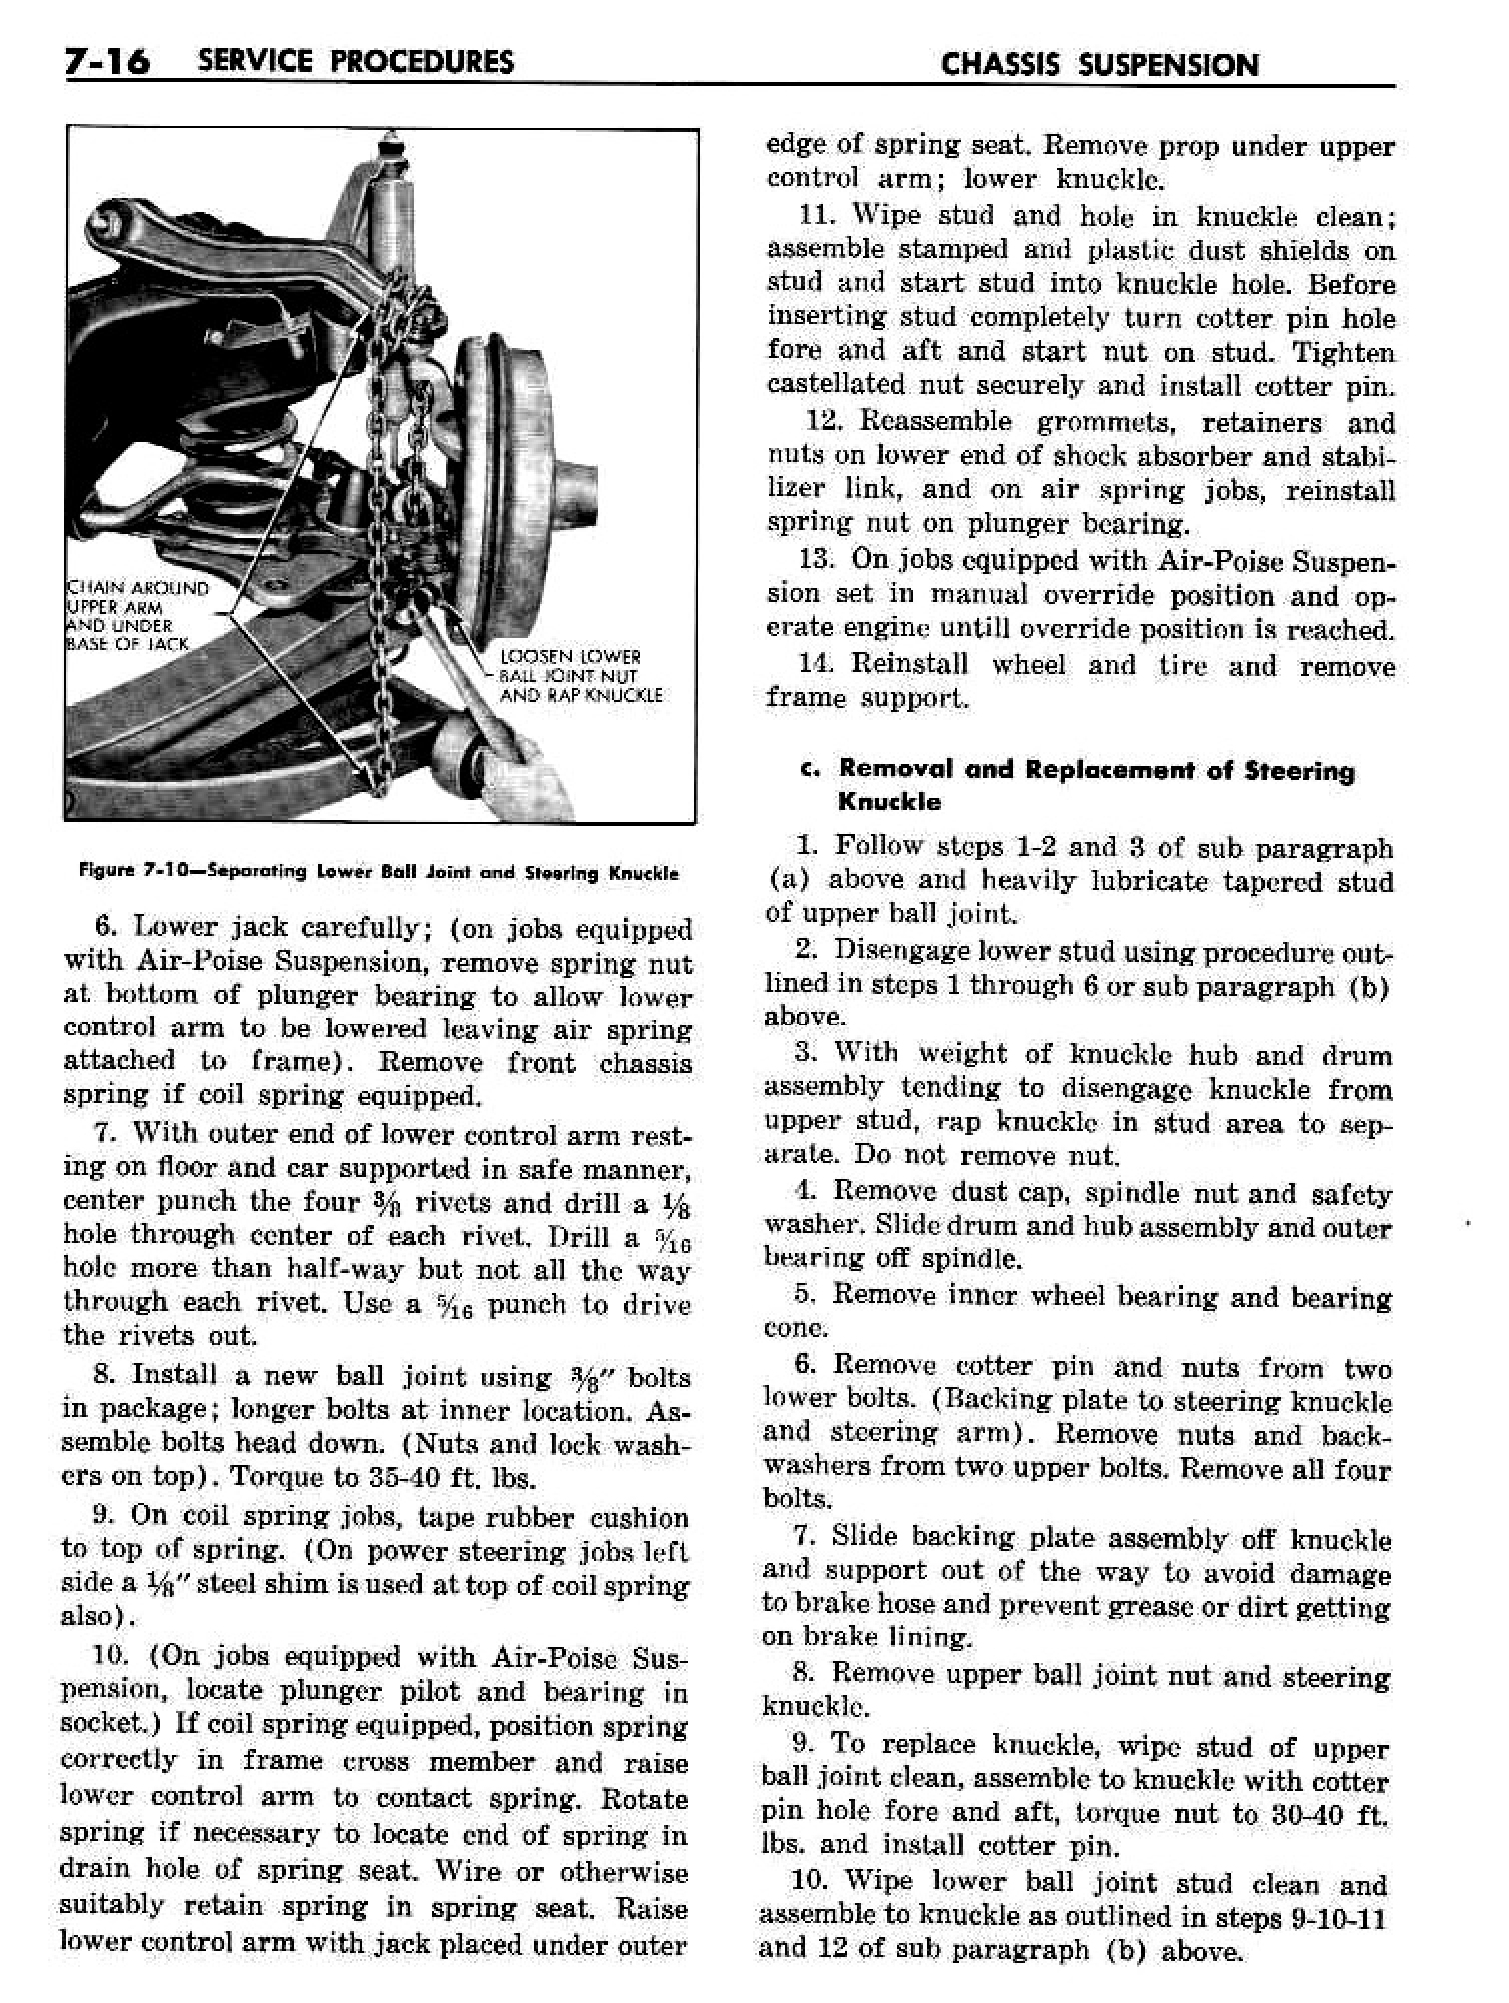 n_08 1958 Buick Shop Manual - Chassis Suspension_16.jpg